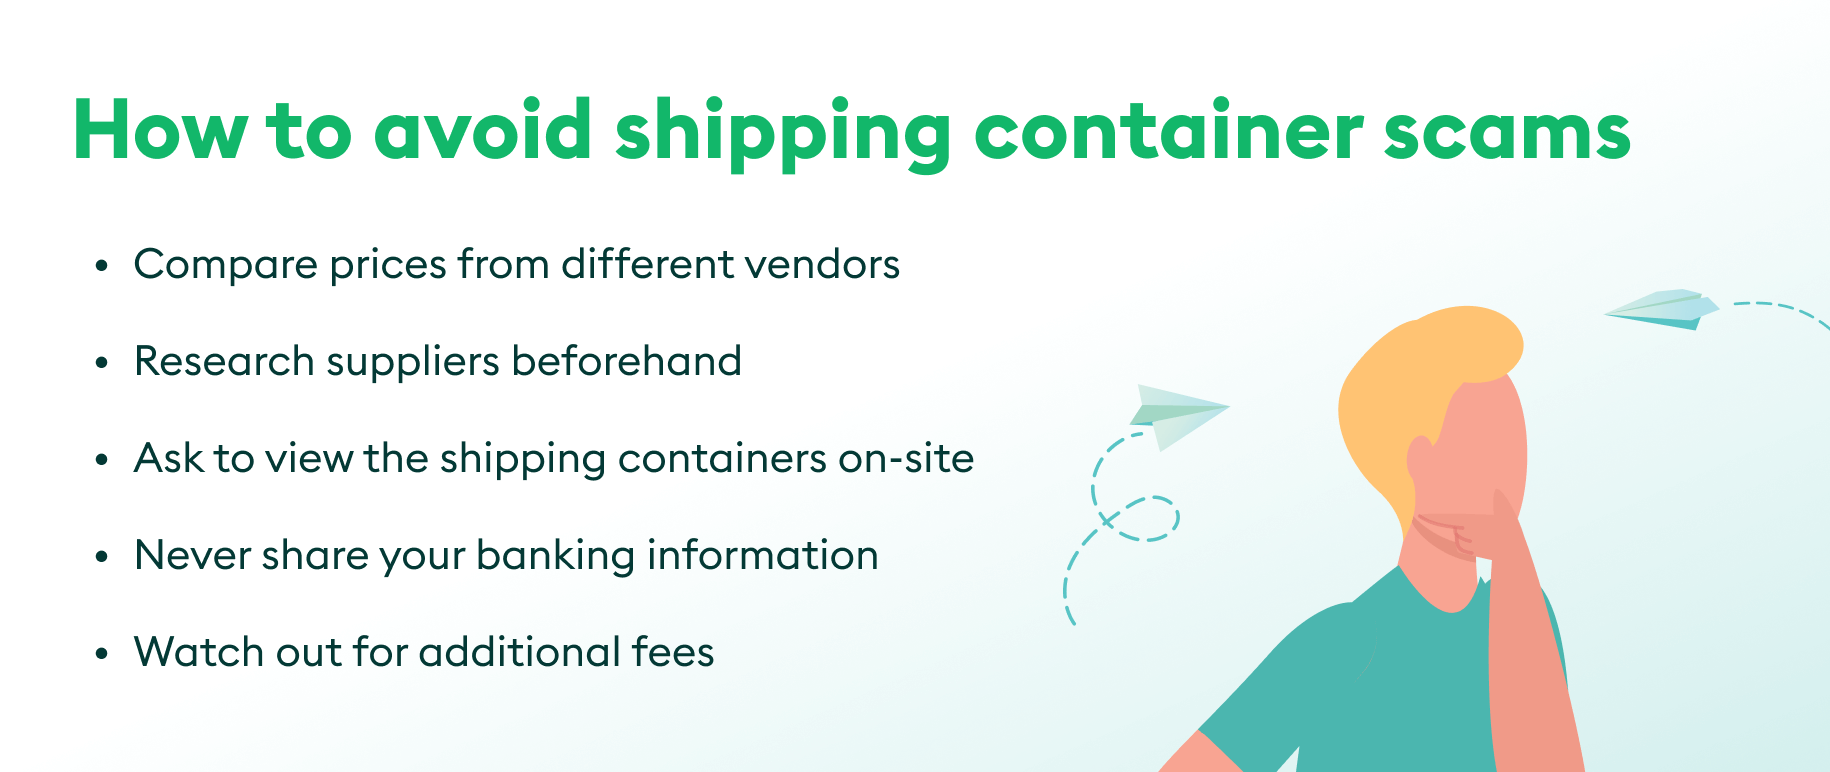 Avoid container scams